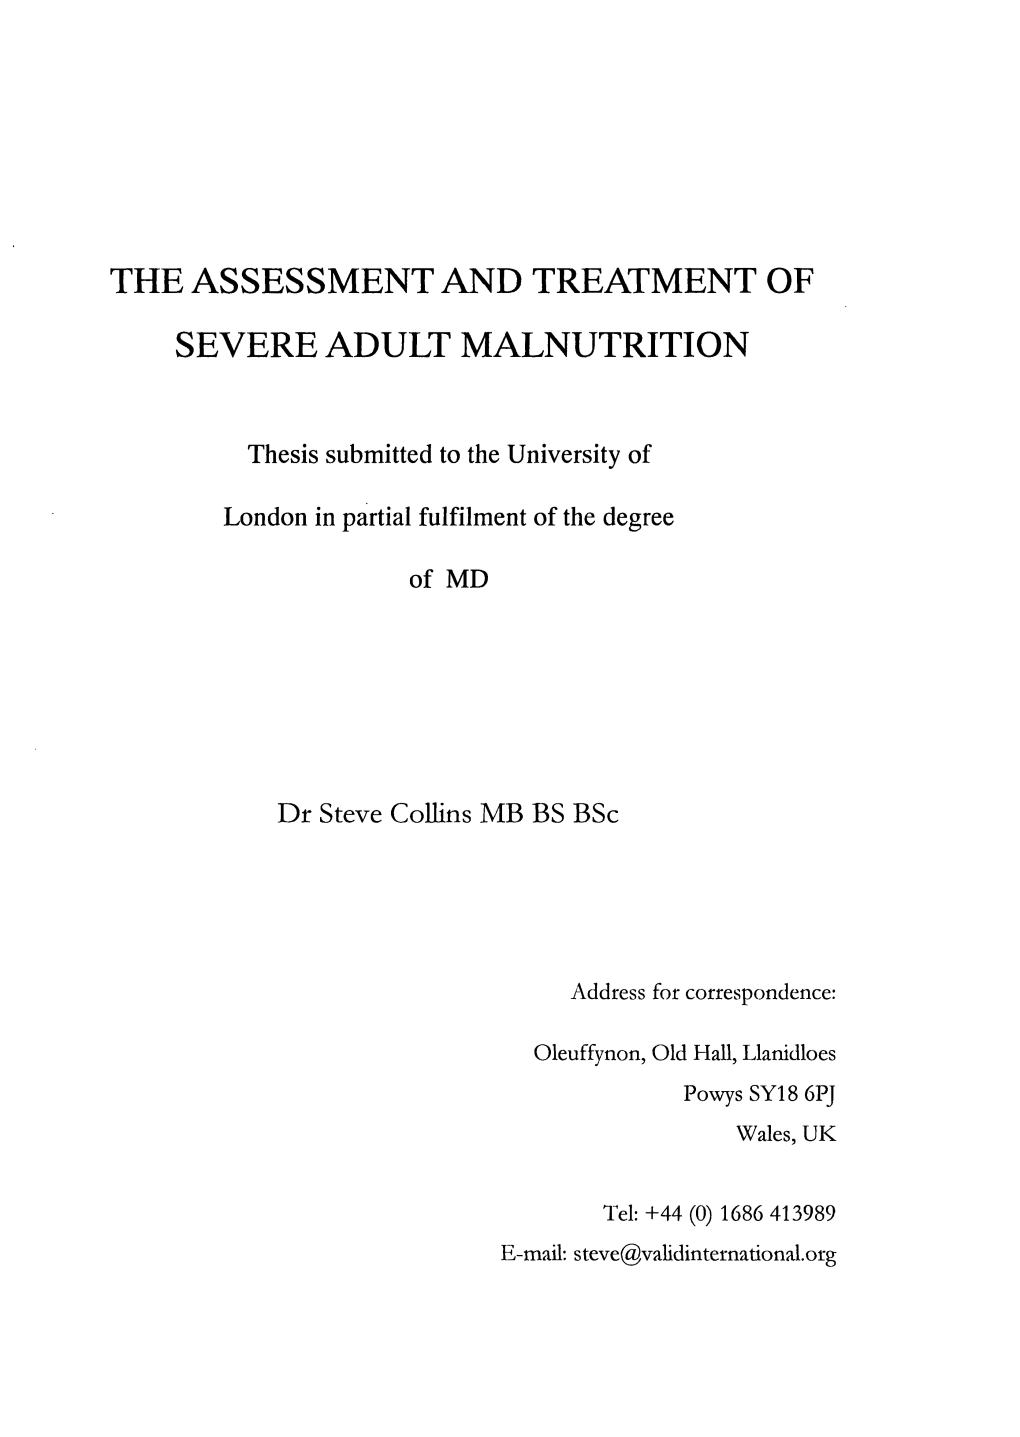 The Assessment and Treatment of Severe Adult Malnutrition